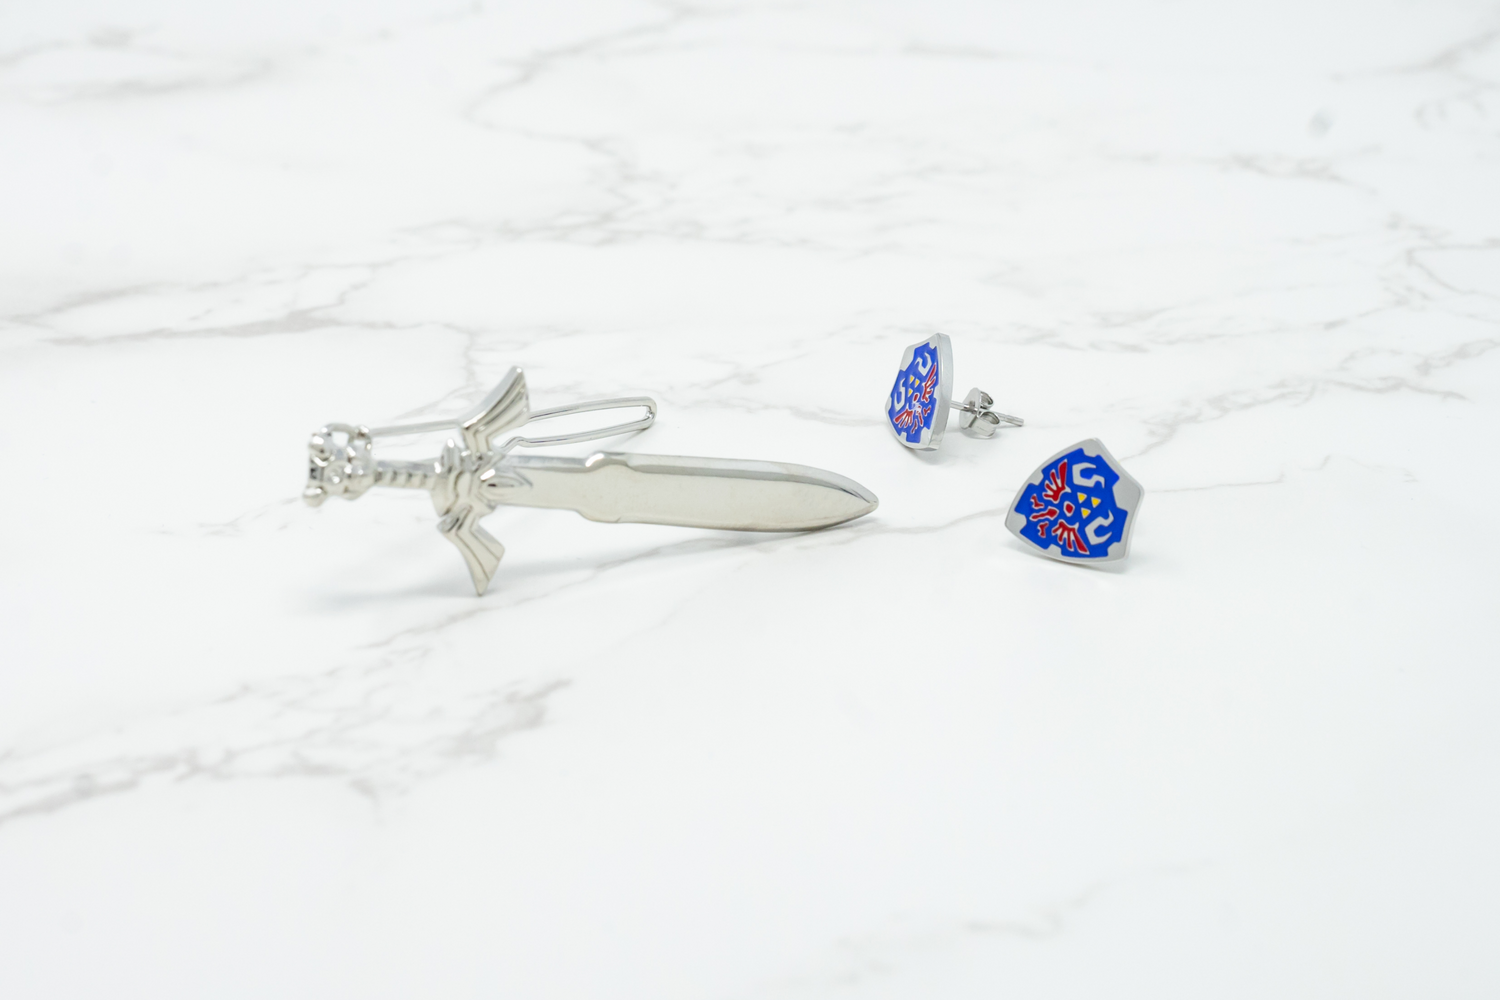 A silver hair clip next to a pair of blue, red and yellow earrings featuring a design inspired by the Legend of Zelda